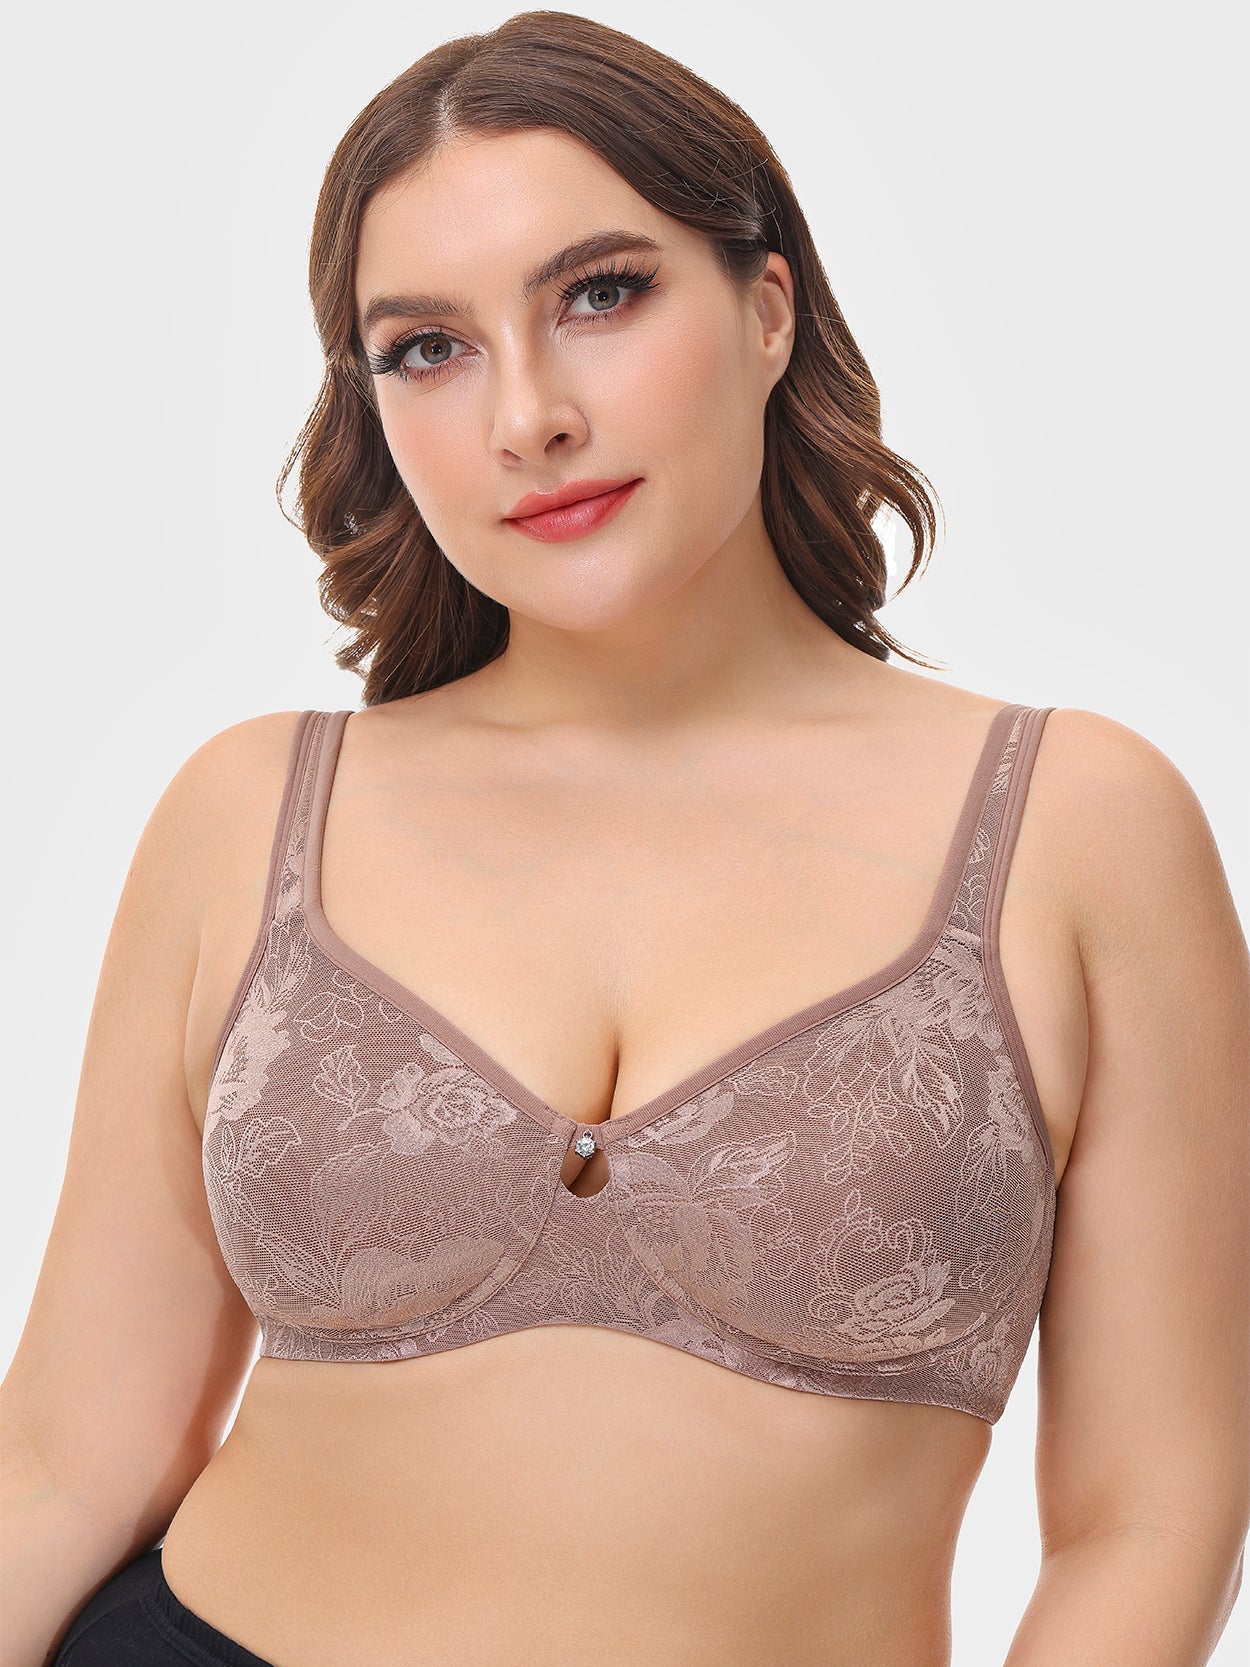 Full Cup Plus Size Bras For Womens Bralette Wireless Minimizer